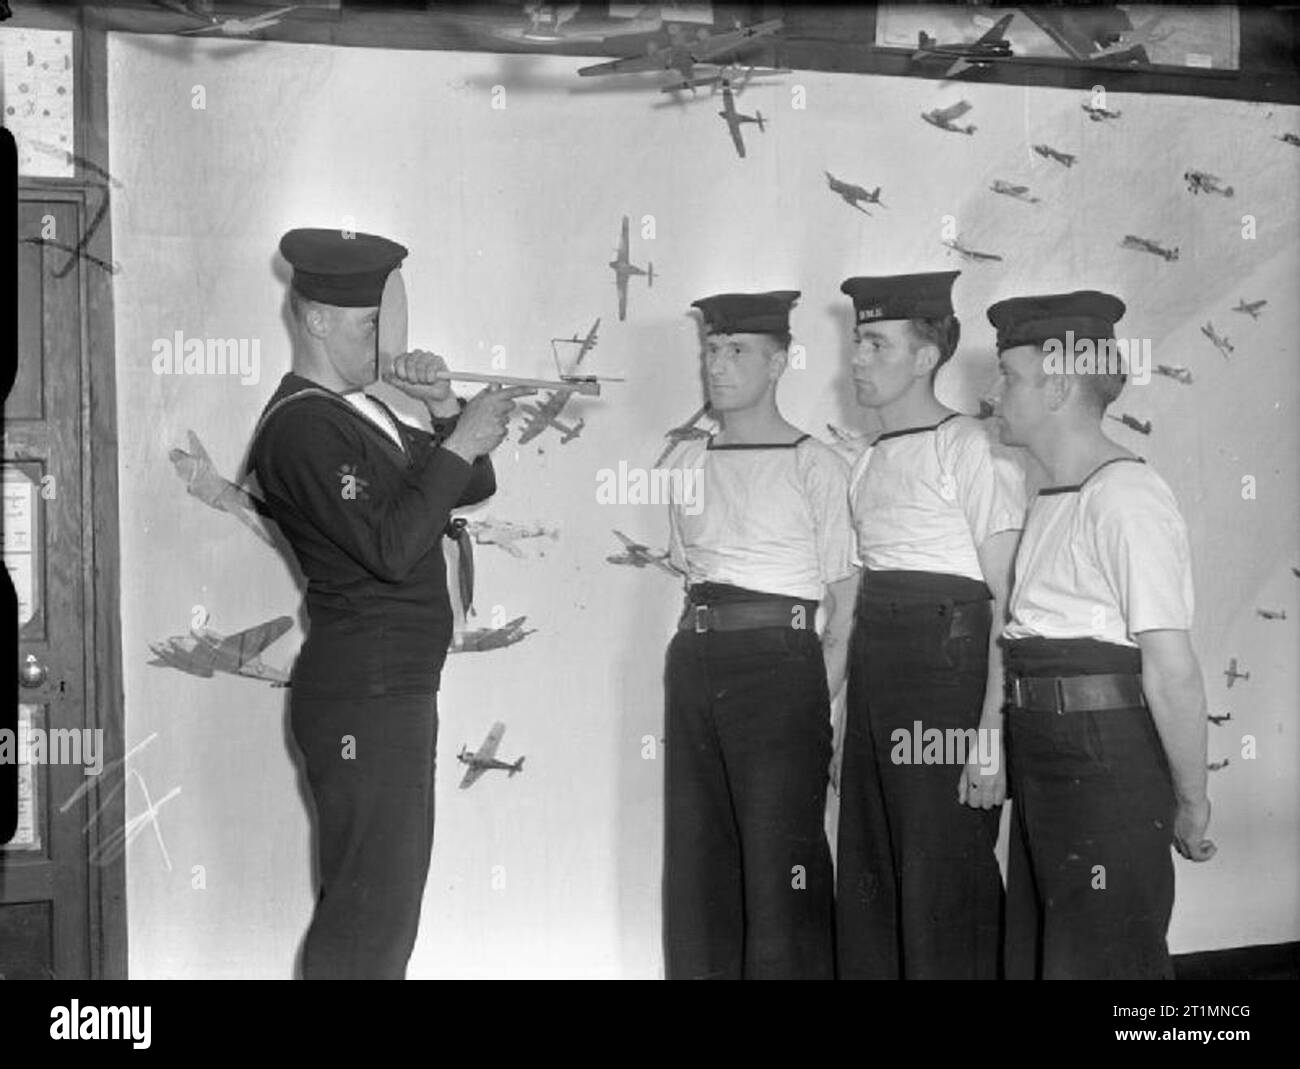 The Royal Navy during the Second World War Four Royal Navy Ratings take part in a gunnery and aircraft recognition class using a visual trainer to assess the bearing and angle of an aircraft. Behind them is a collage of illustrations of aircraft in different positions angles and bearings etc. Stock Photo